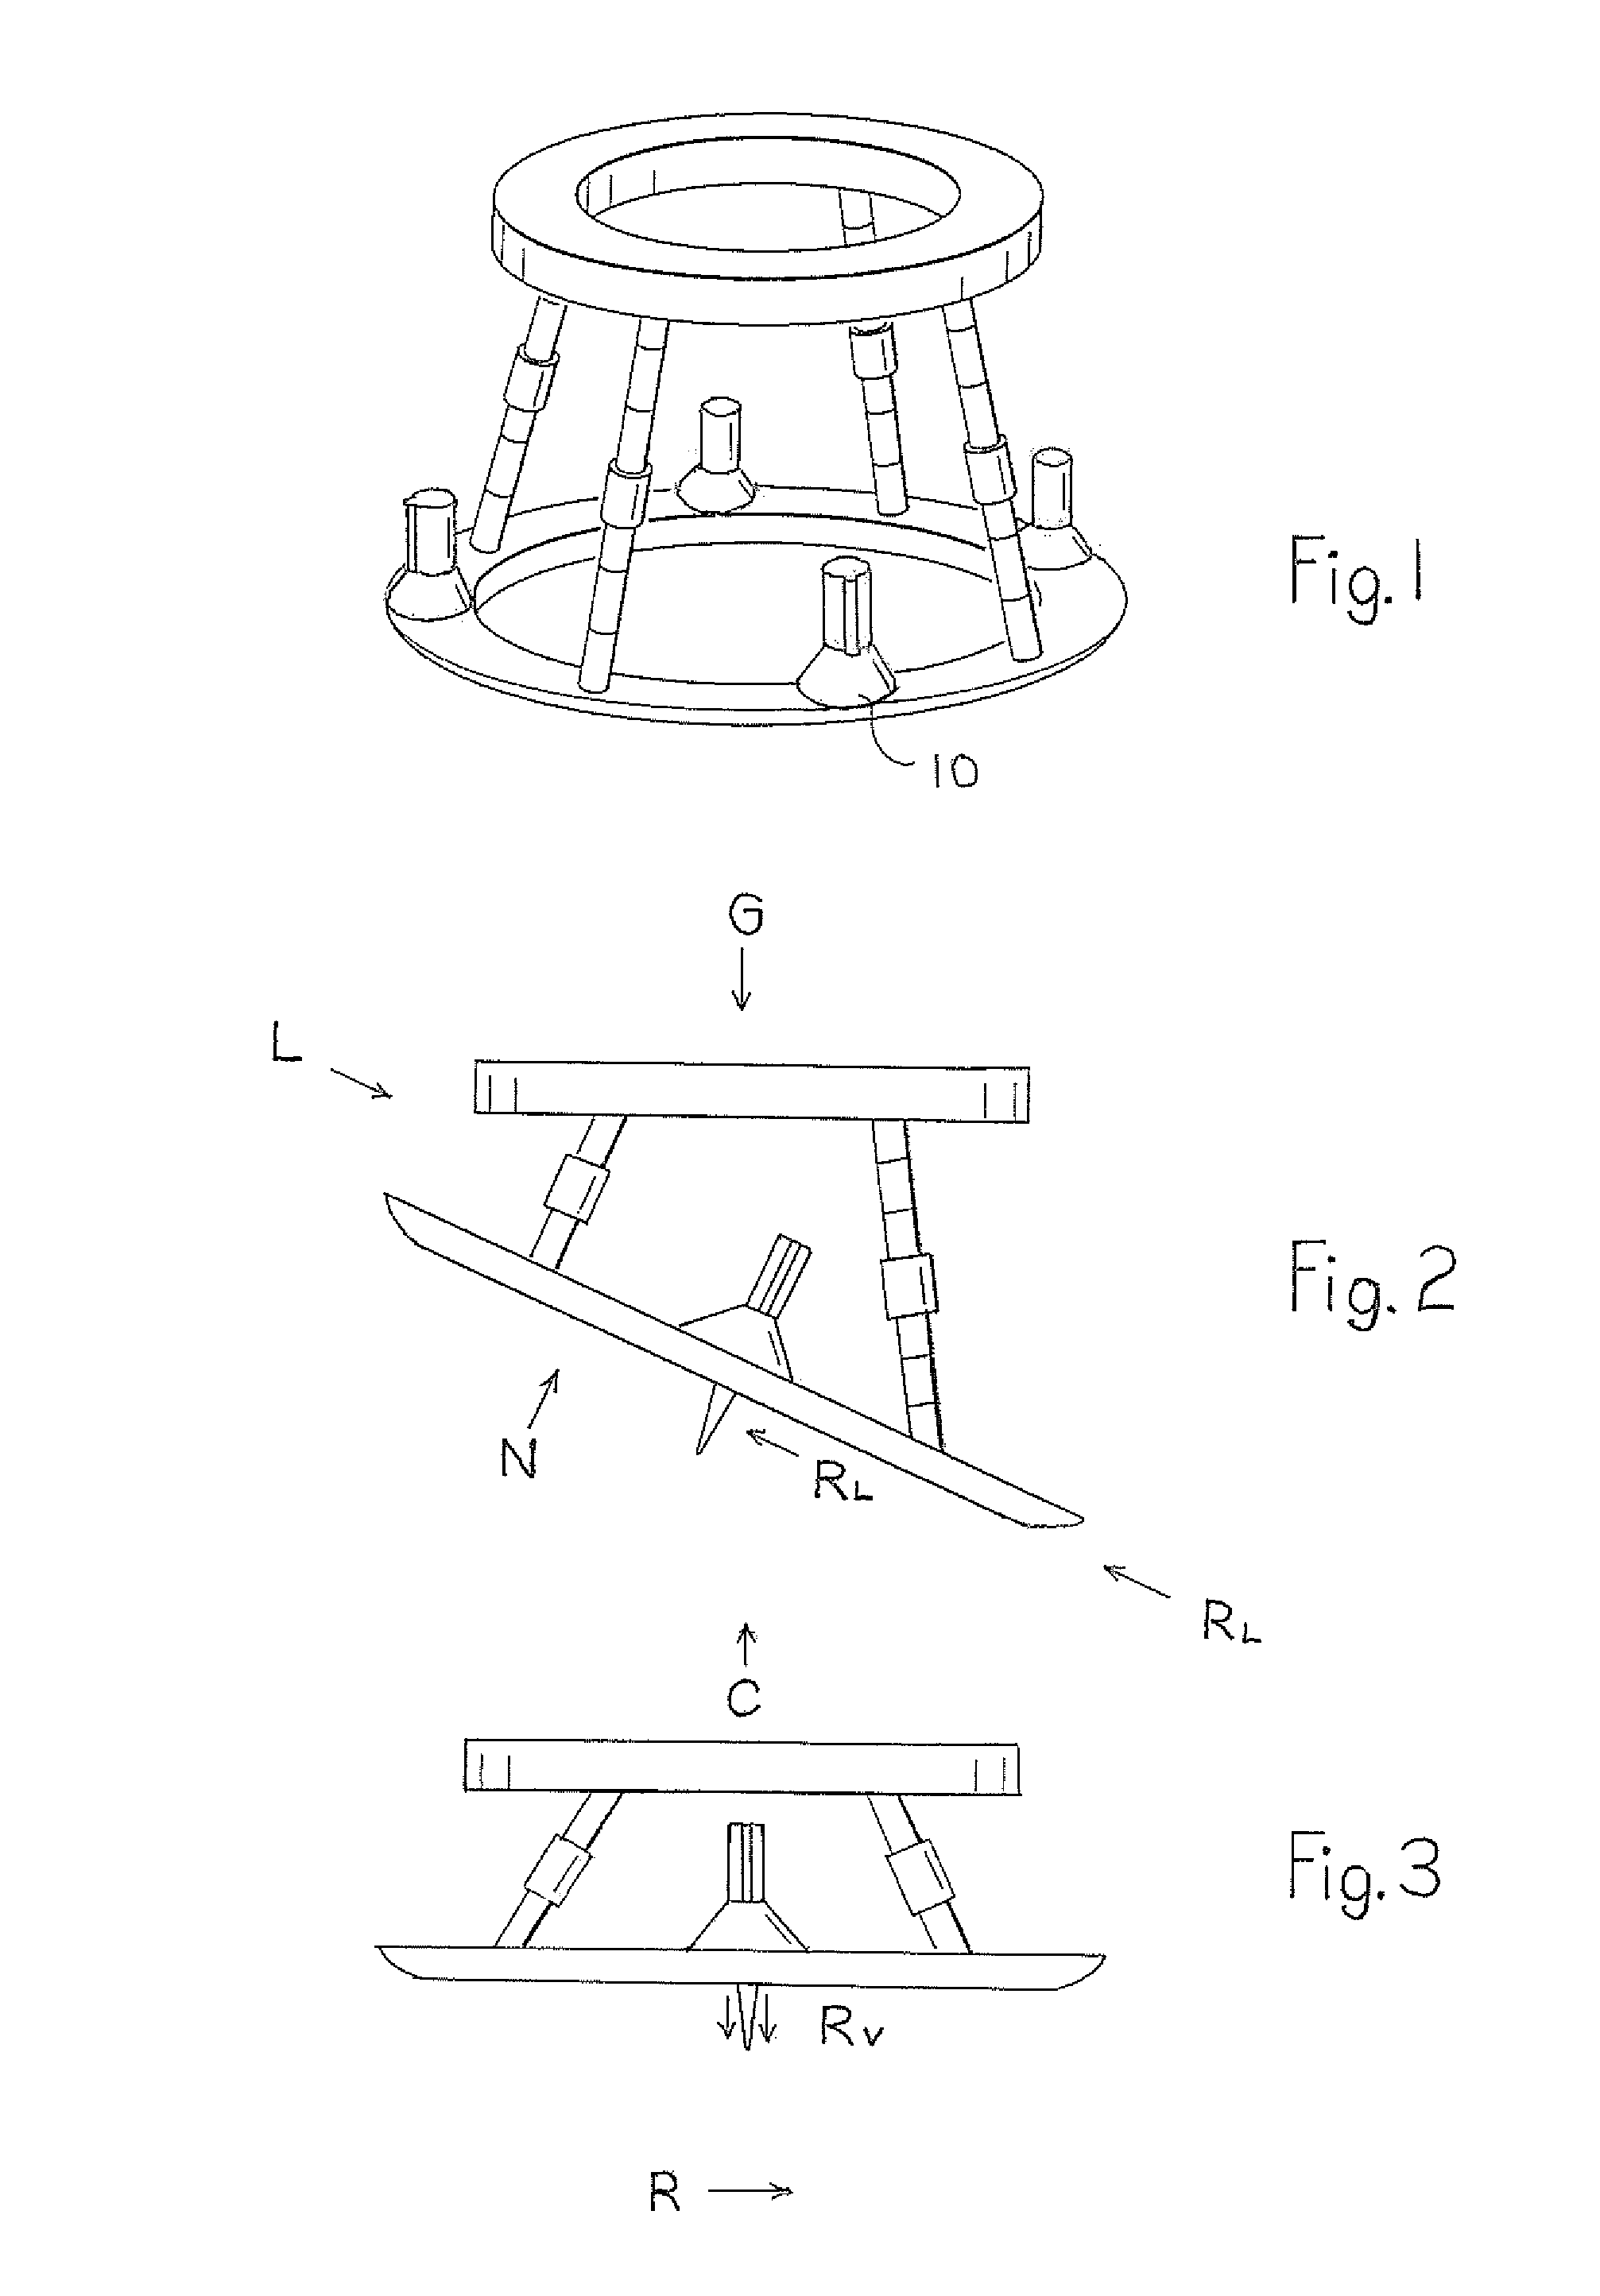 Mobile base anchoring device (MOBAD)